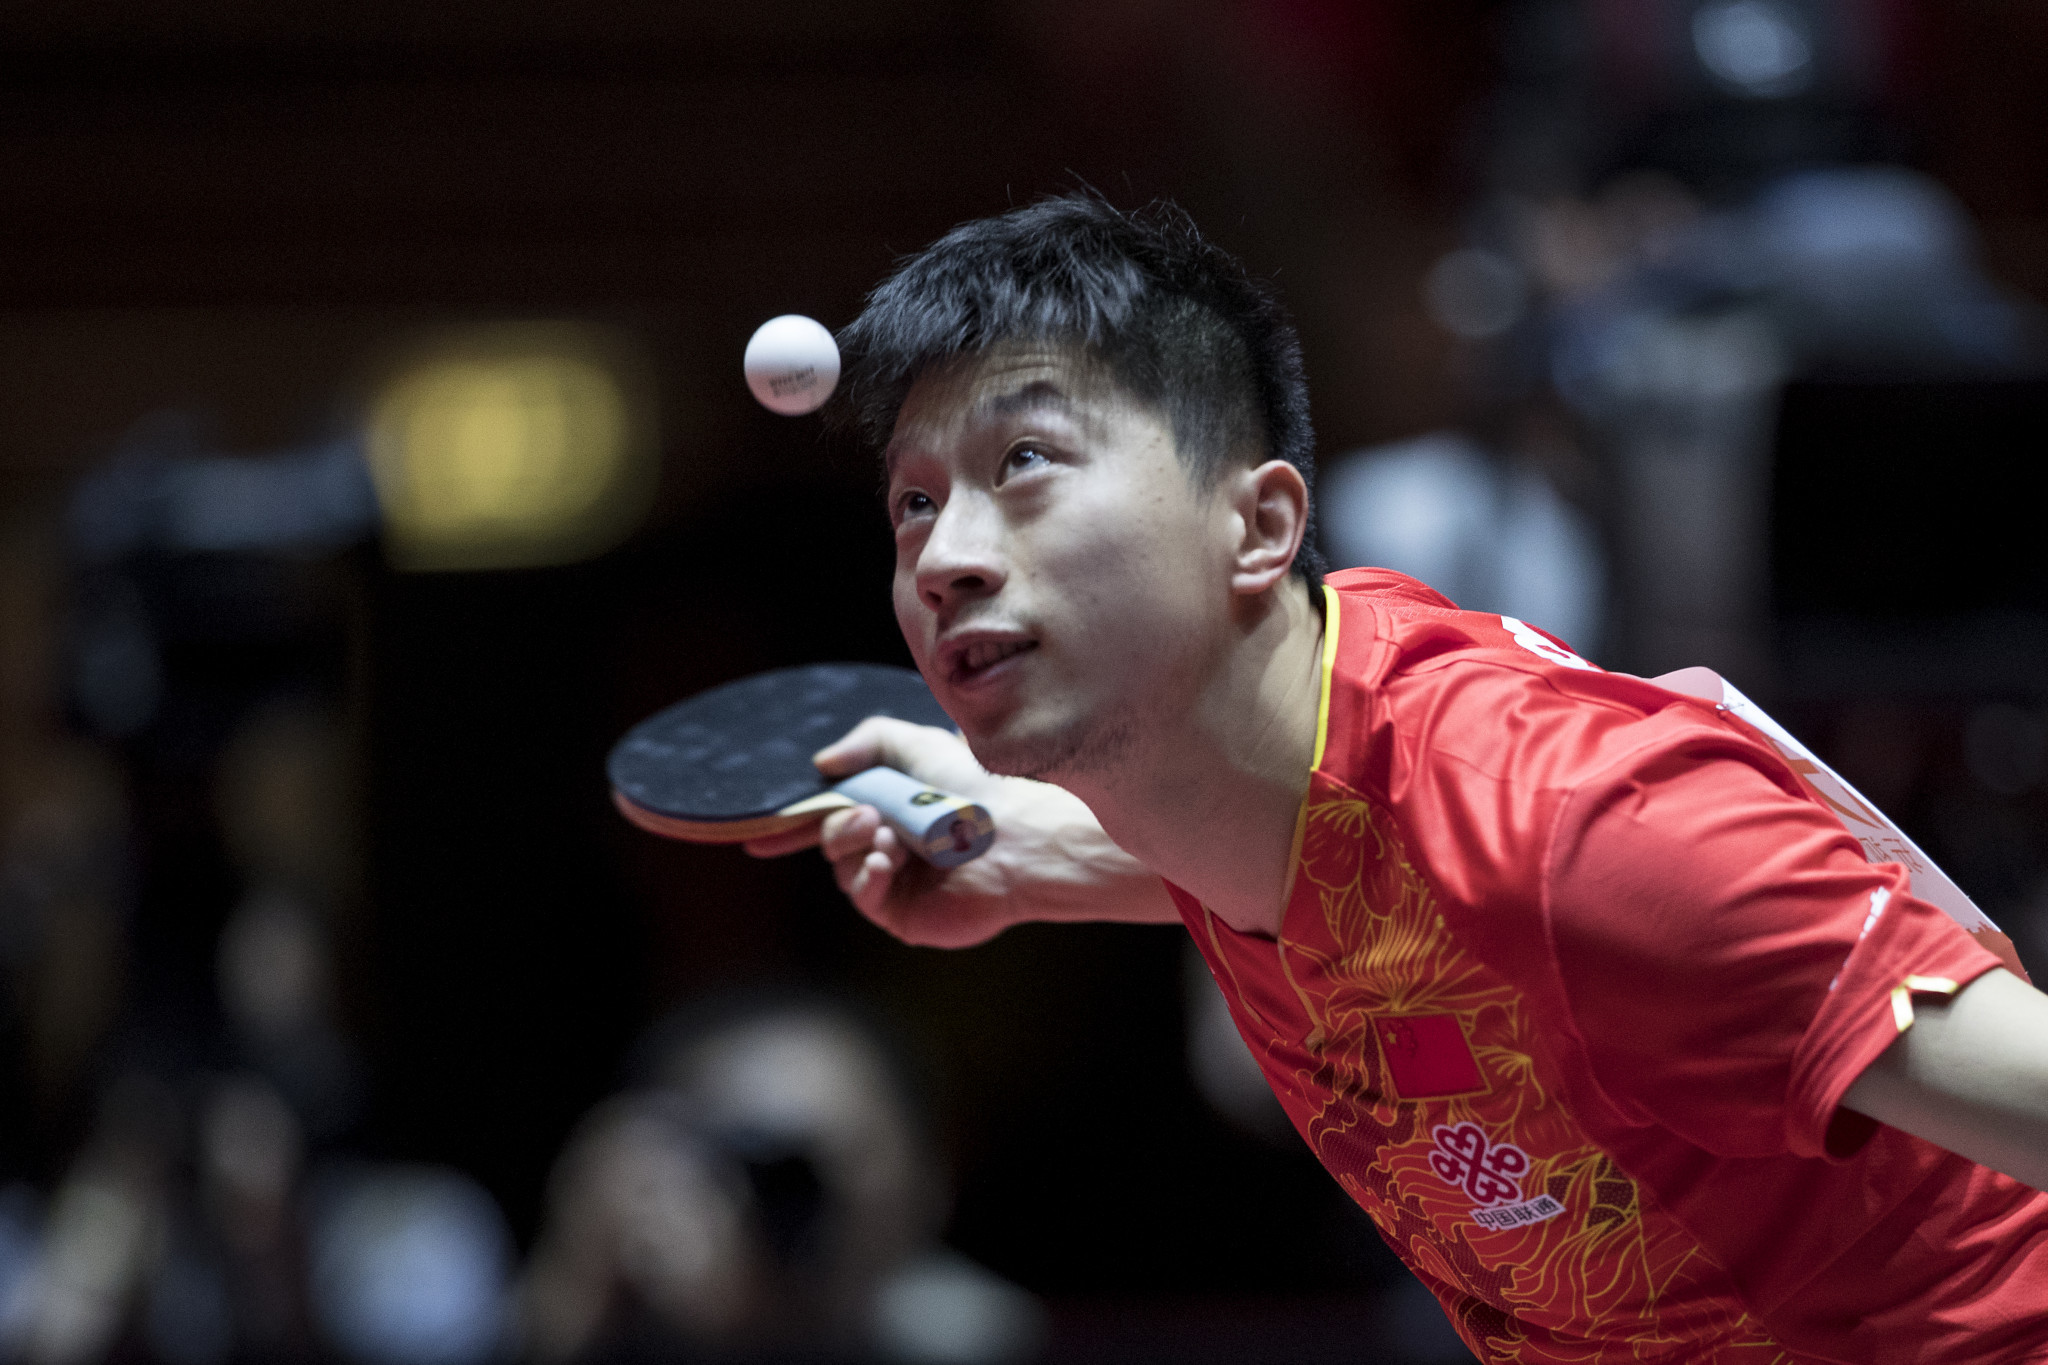 The 2017 World Table Tennis Championships took place in German city Düsseldorf, where China's Ma Long defended his men's singles title ©Getty Images